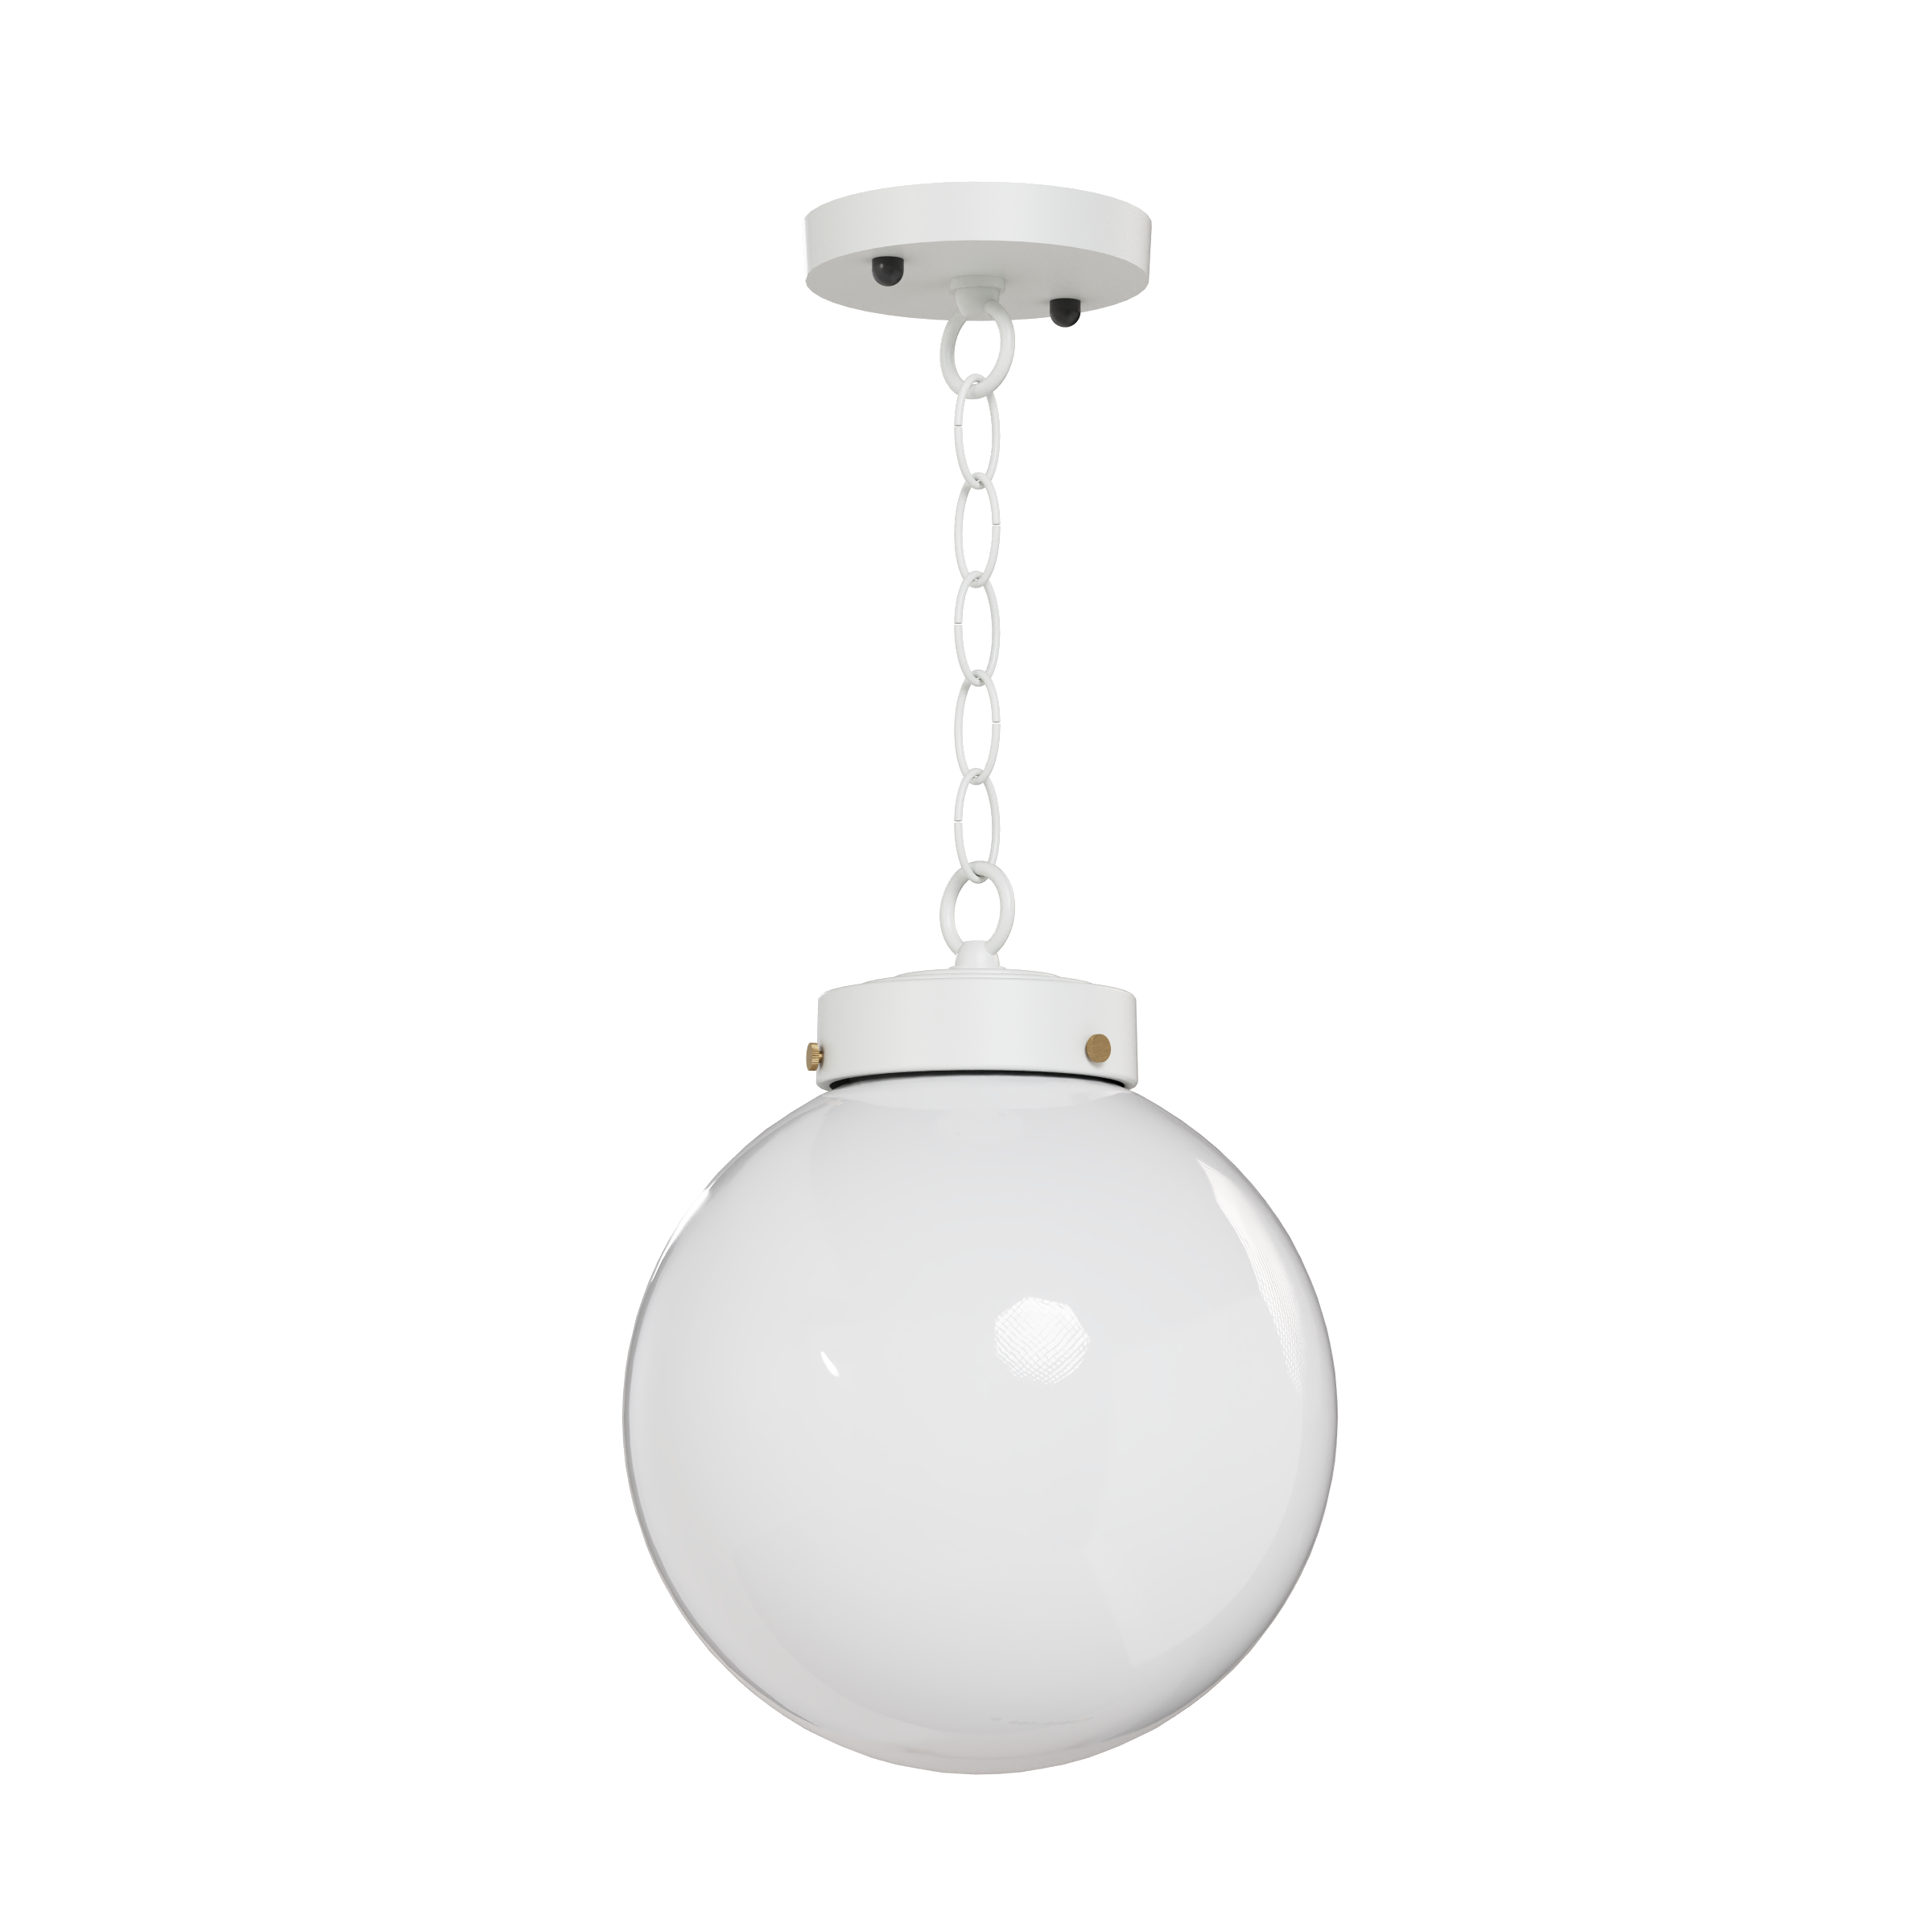 Key West - Ceiling mount with medium chain - 23050